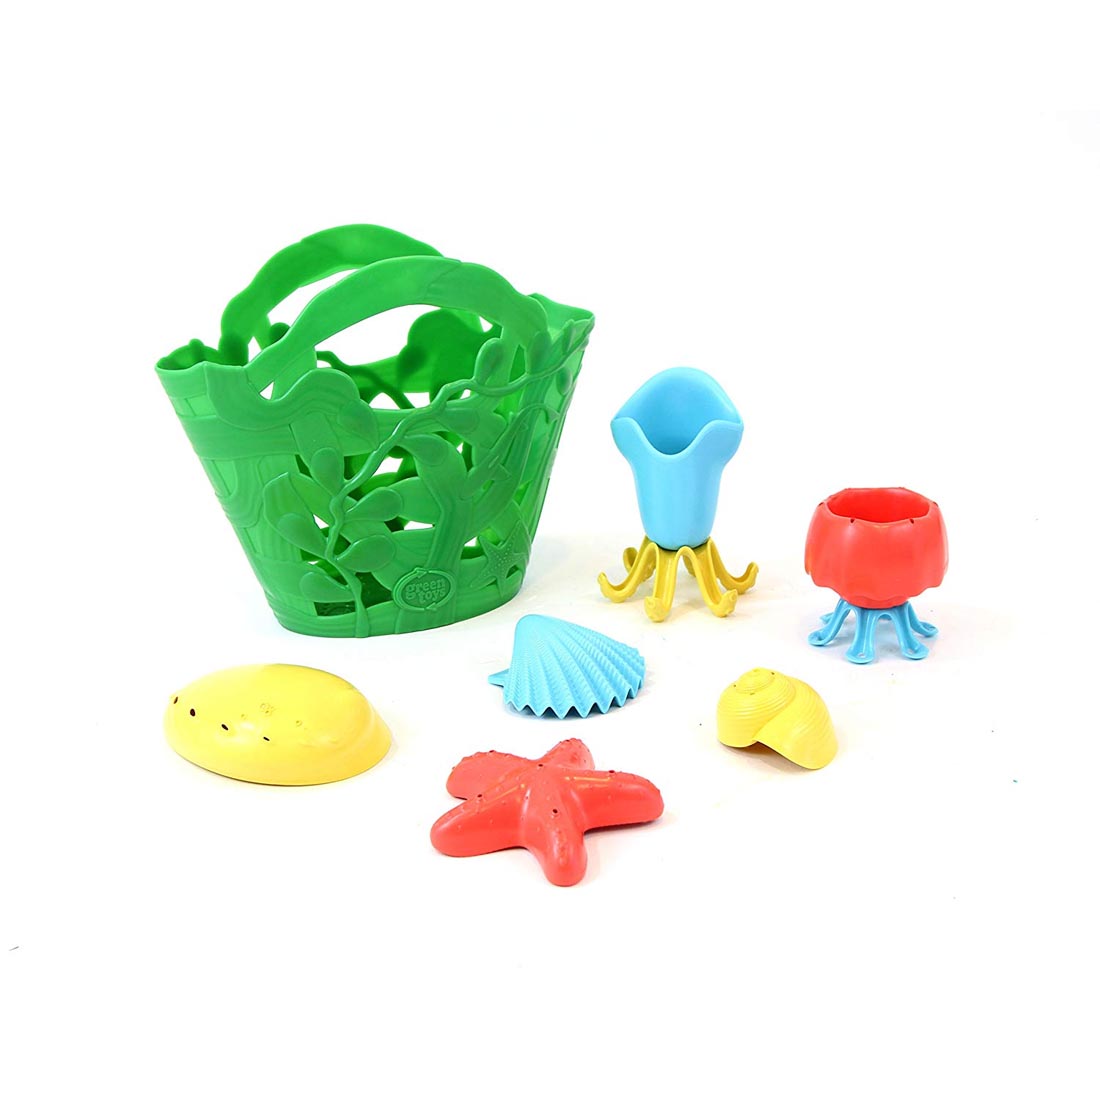 Tide Pool Bath Set includes green plastic basket, starfish, scallop, abalone, snail, squid, and jellyfish